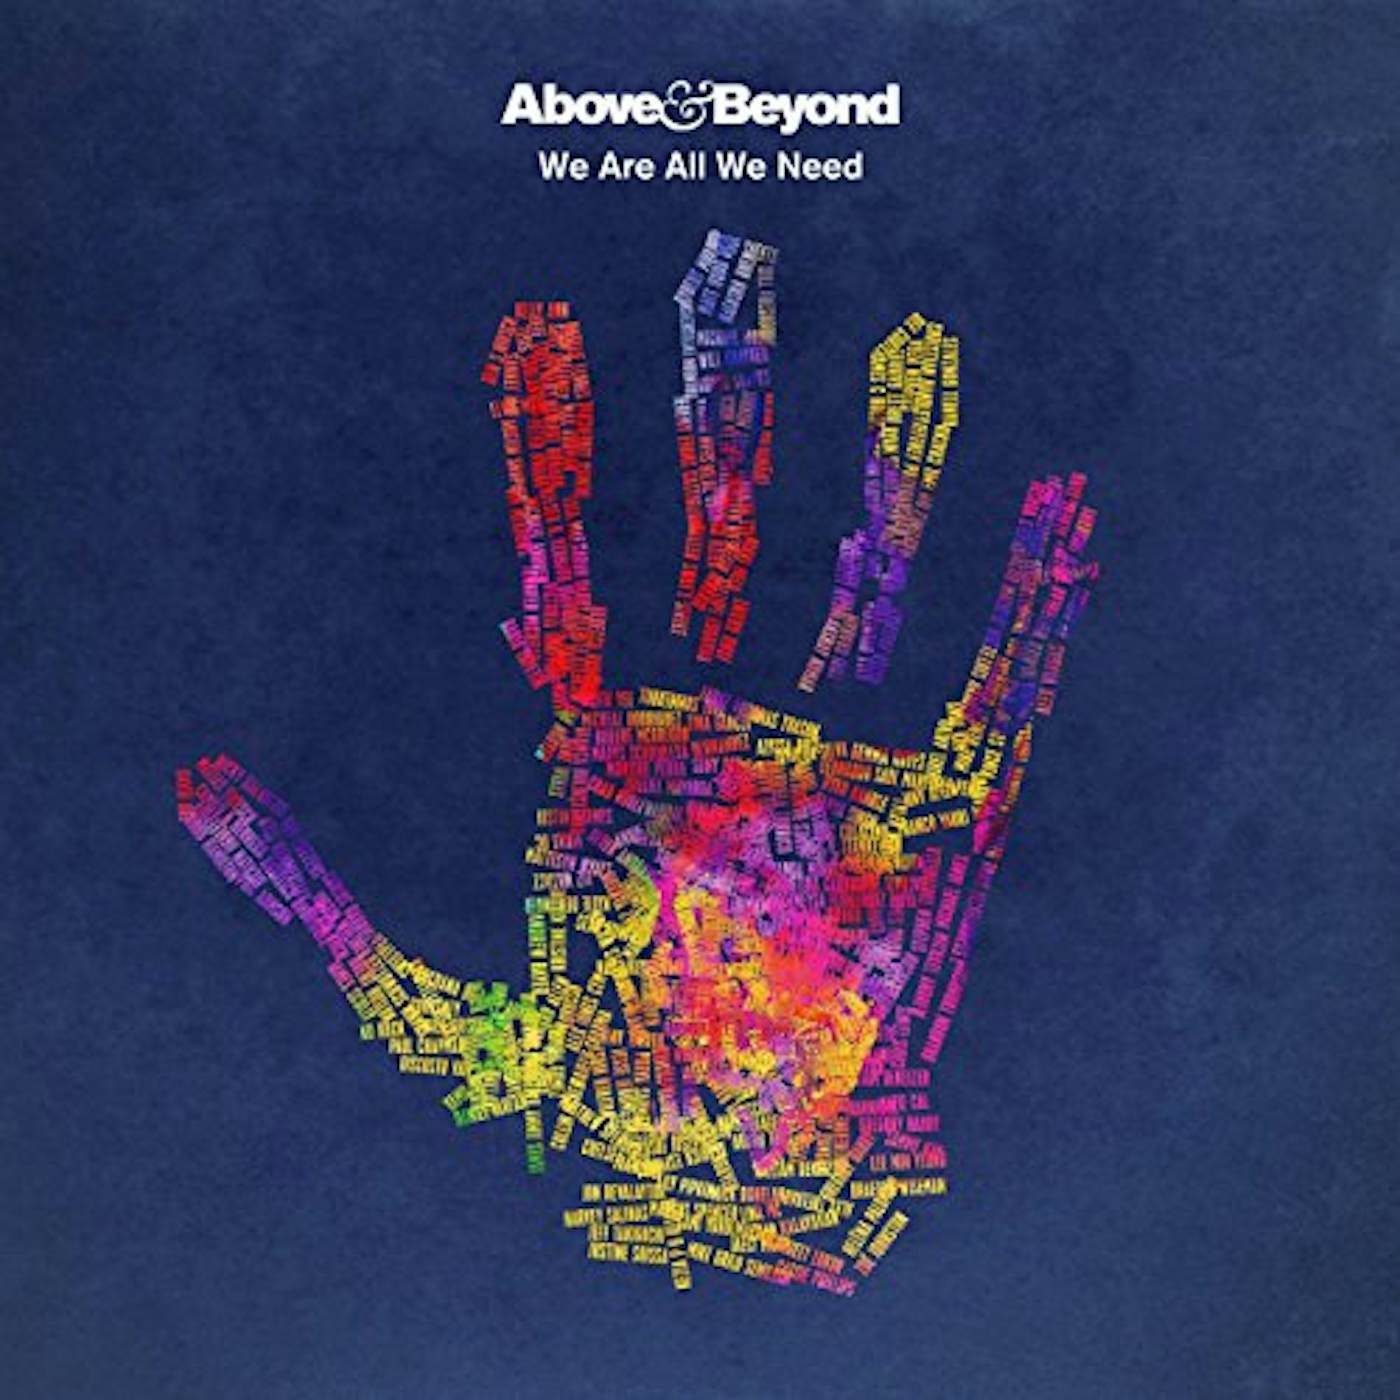 Above & Beyond We Are All We Need Vinyl Record